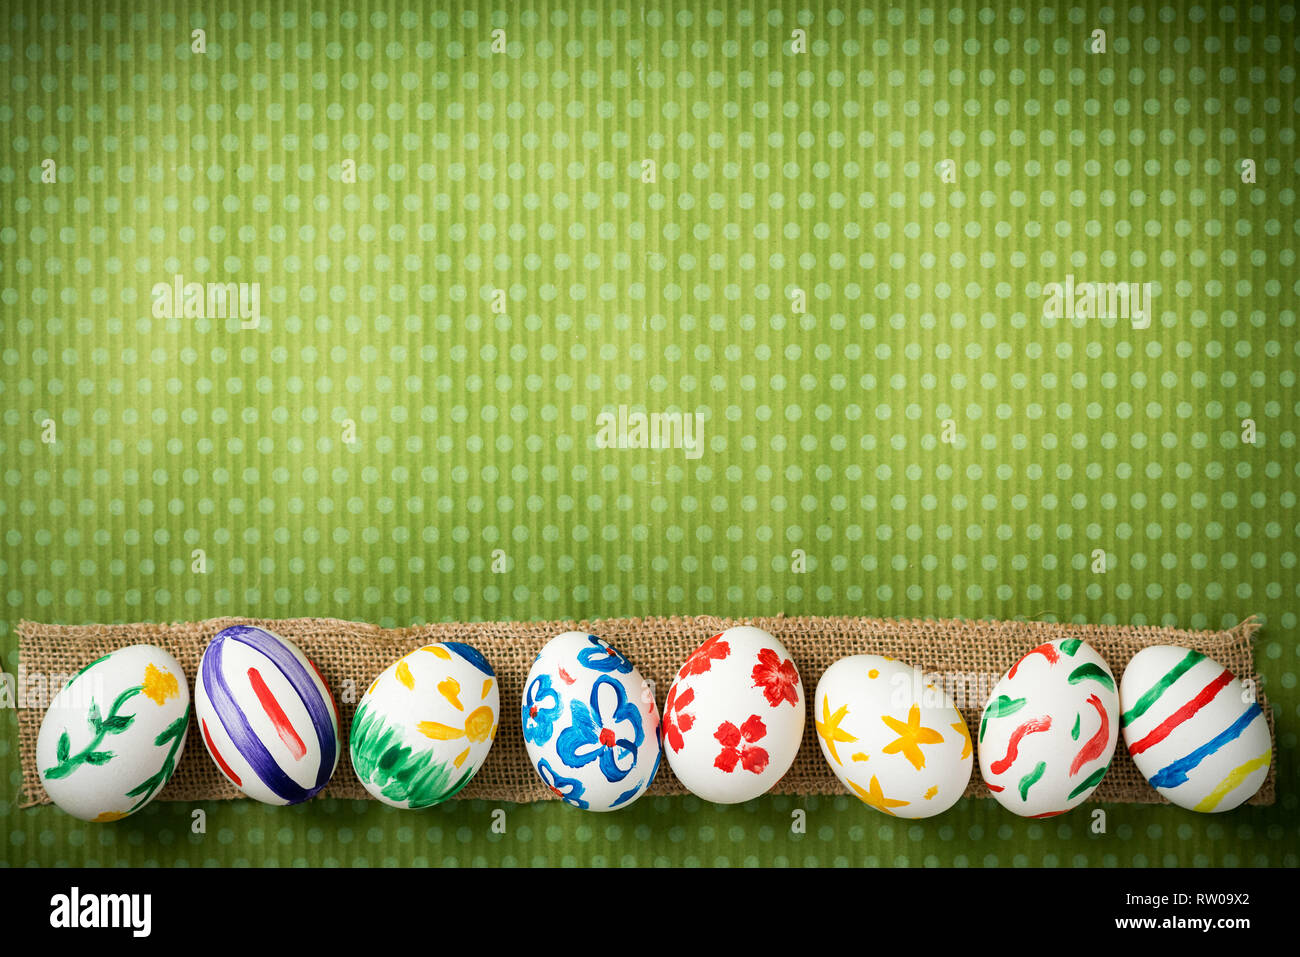 Easter eggs painted by hand on a beautiful green background in white peas. Festive background. Easter ideas. Space for text. Happy easter. Stock Photo